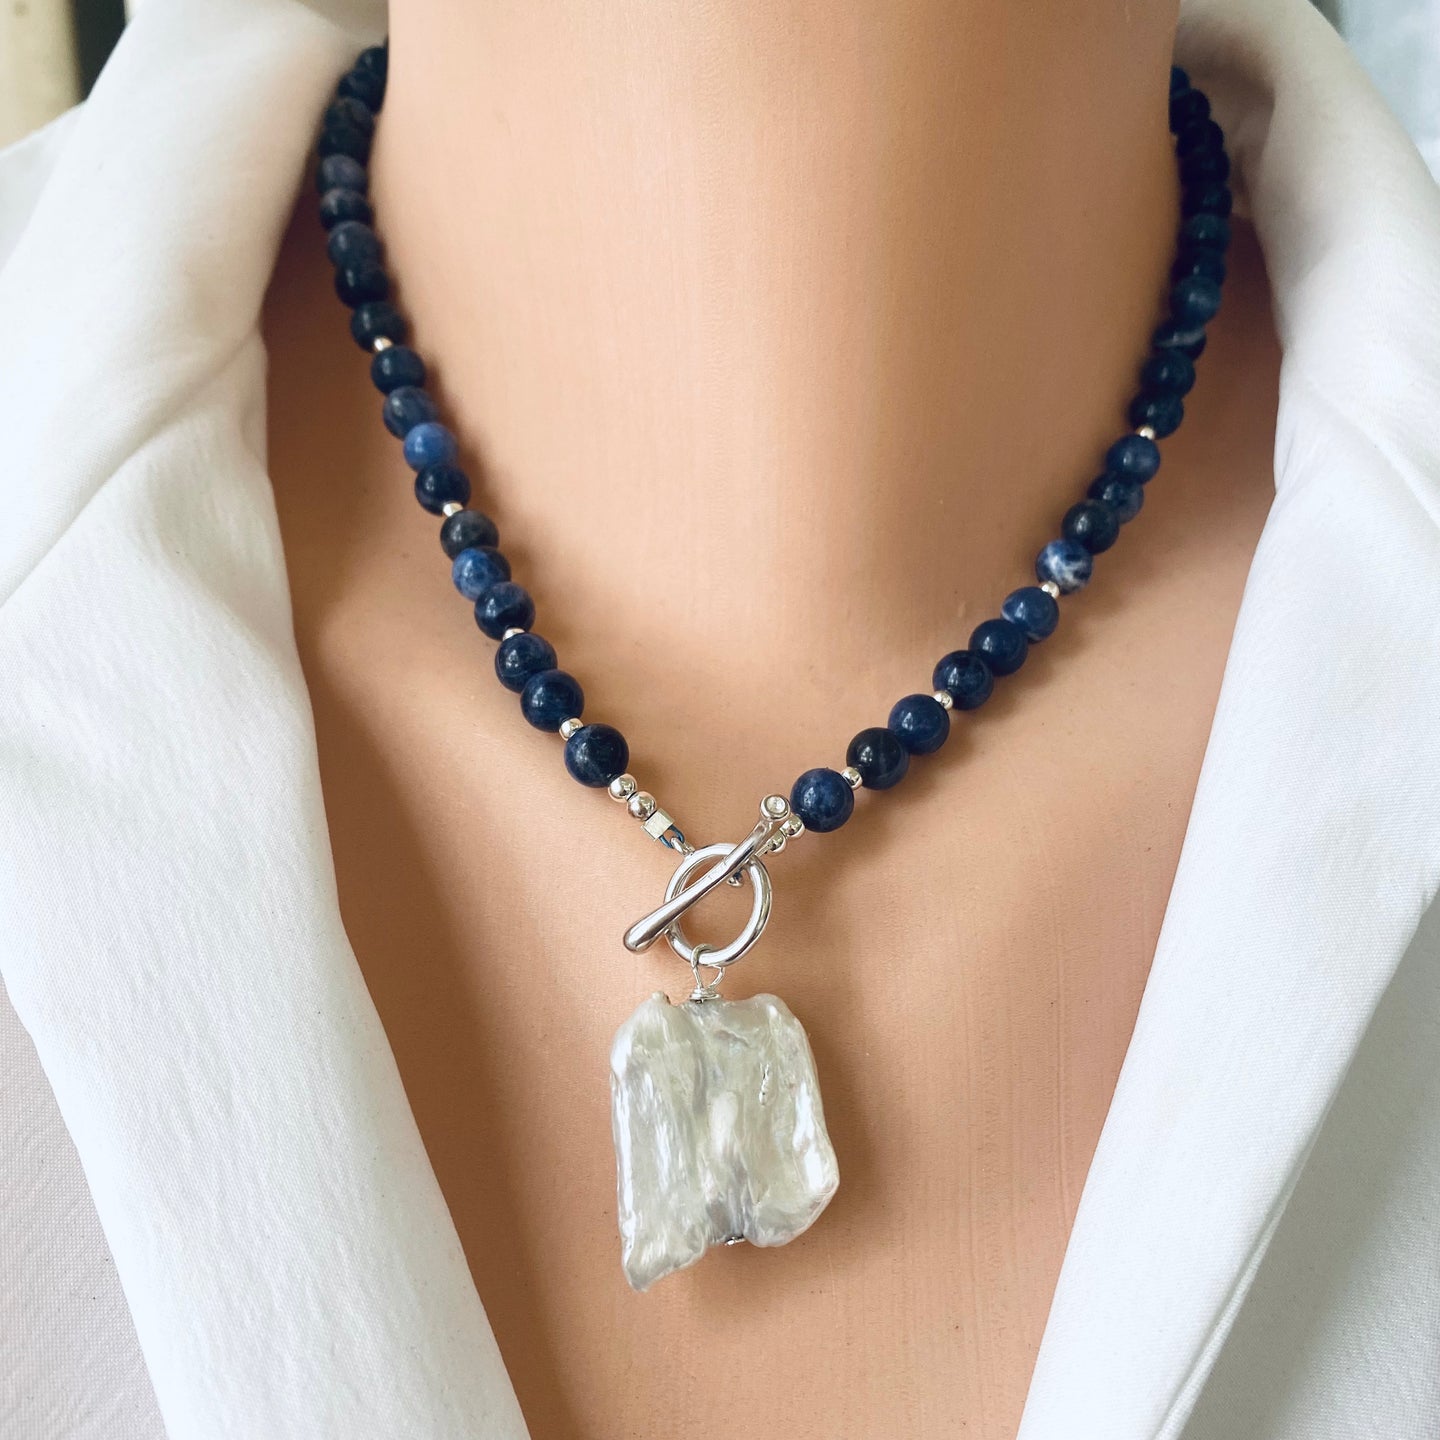 Blue Sodalite Toggle Necklace with Square Shape Keshi Pearl Pendant, Sterling Silver, 17